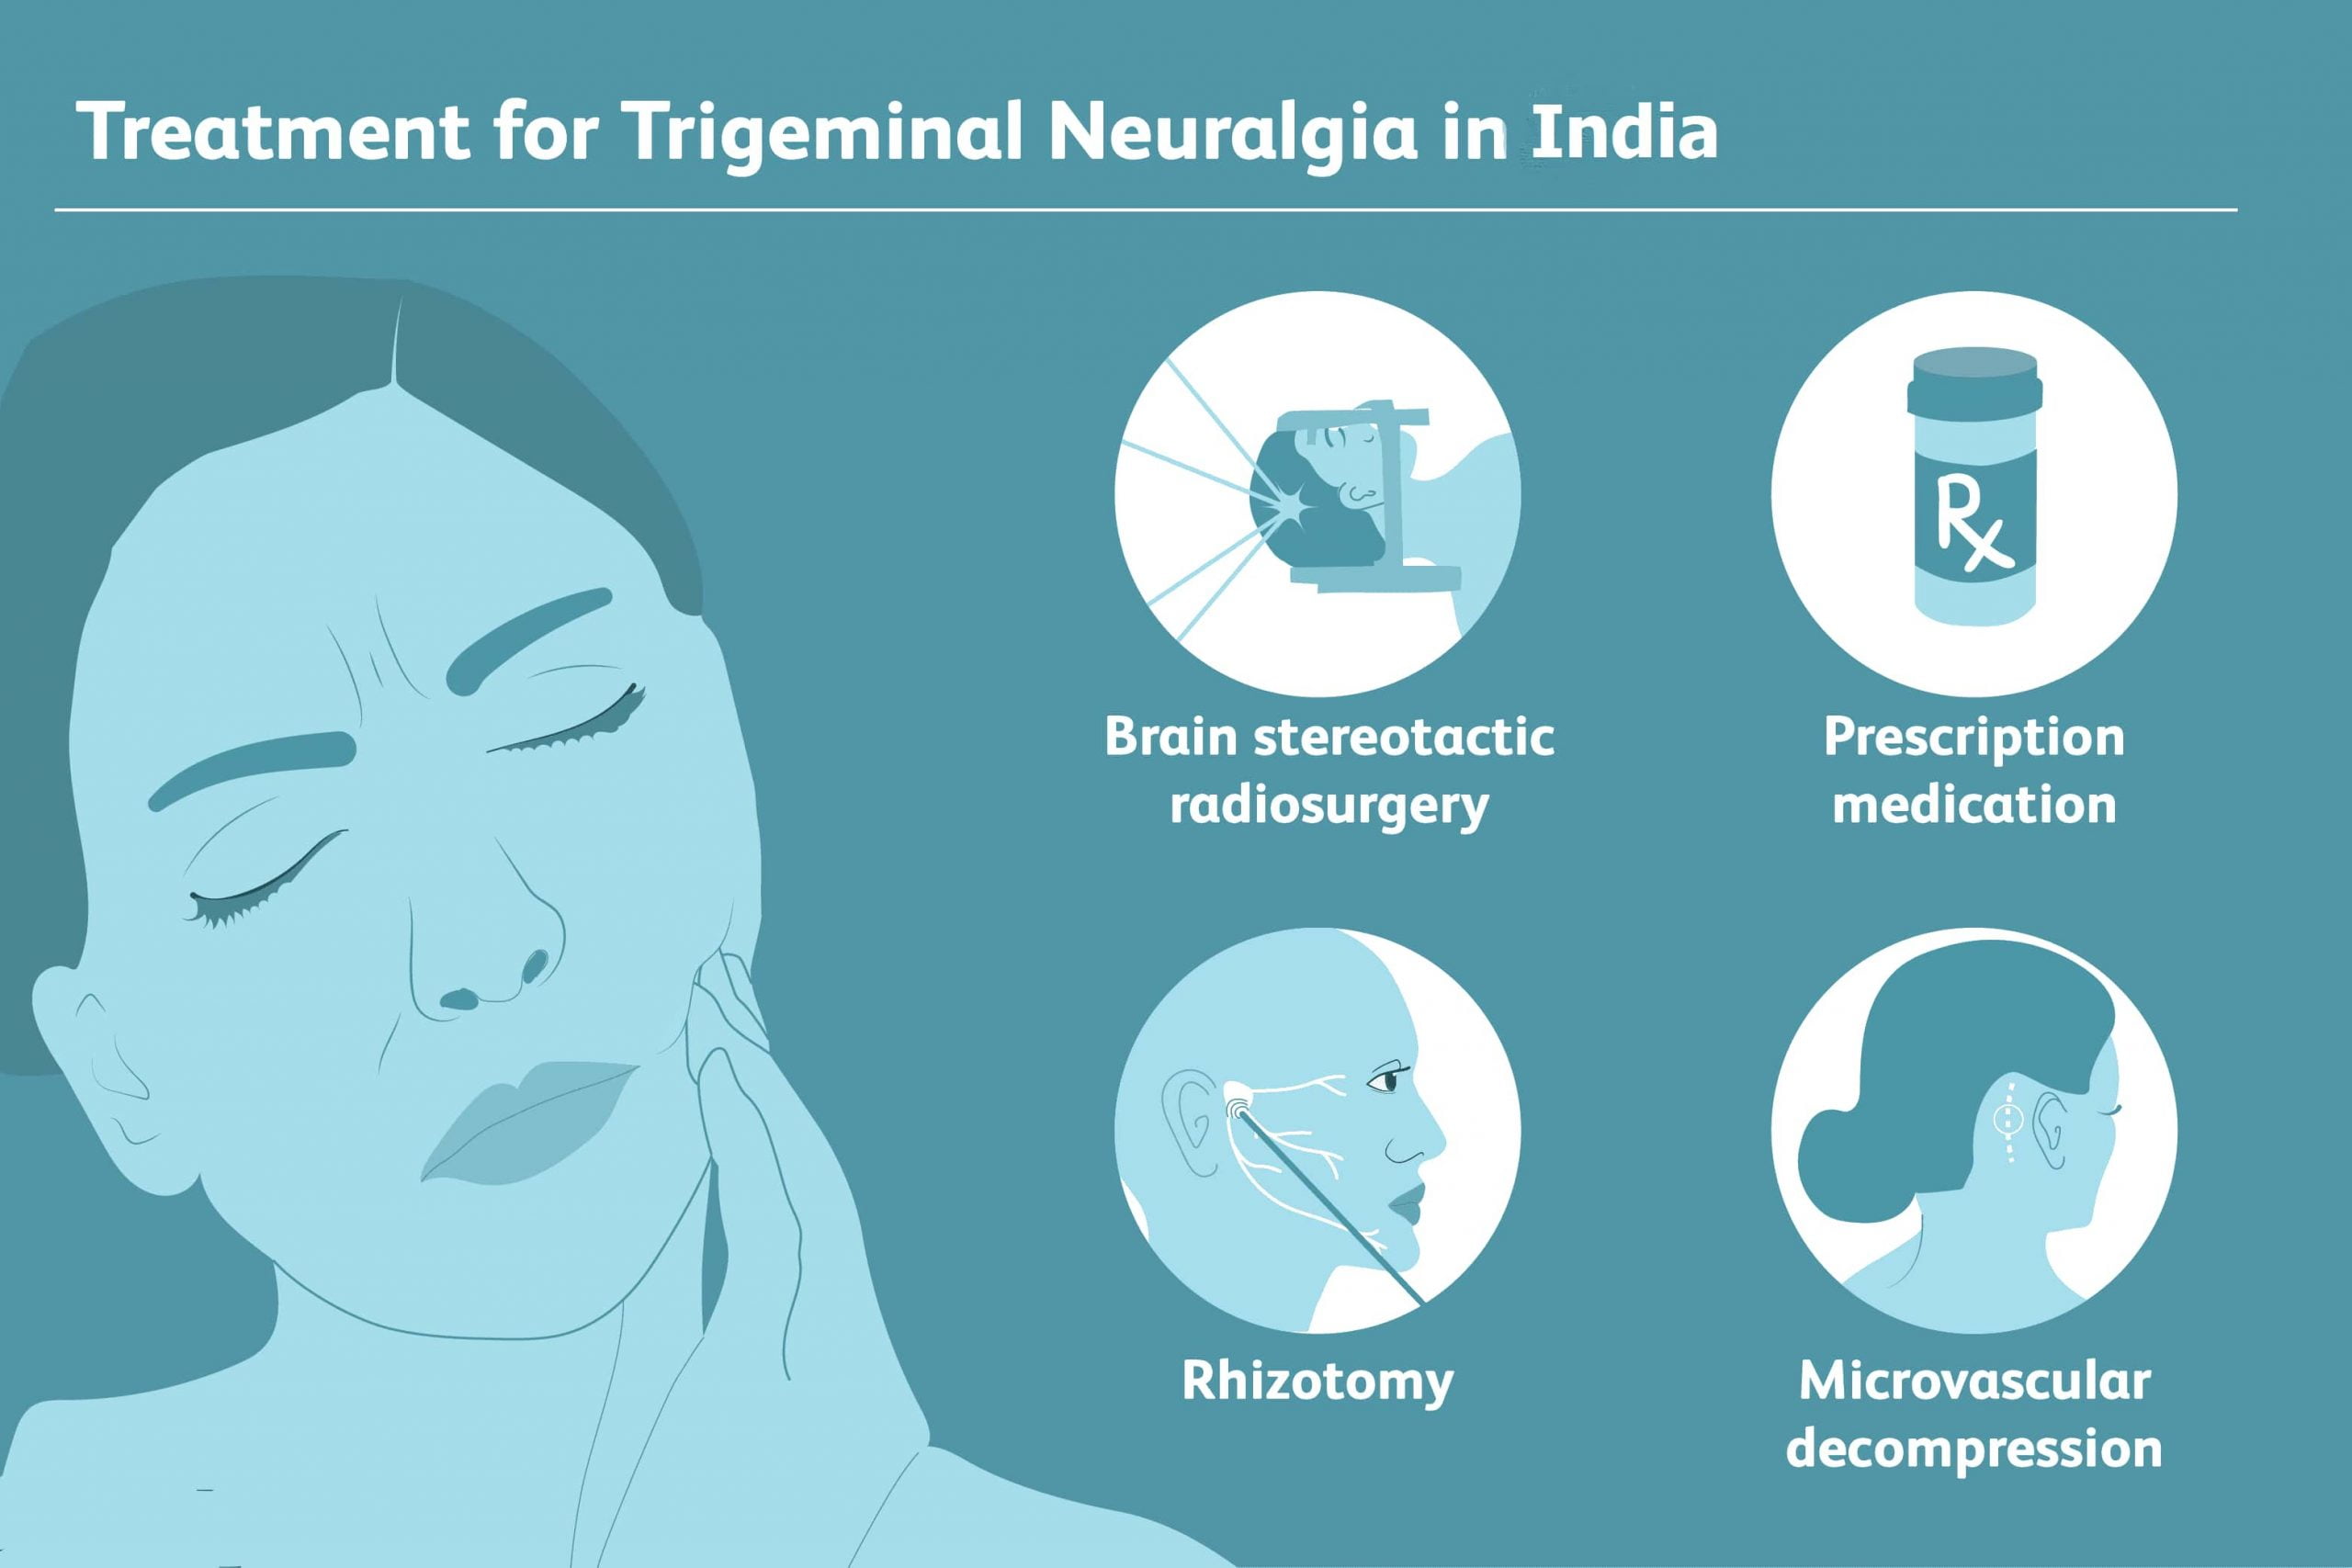 What is the Best Treatment for Trigeminal Neuralgia